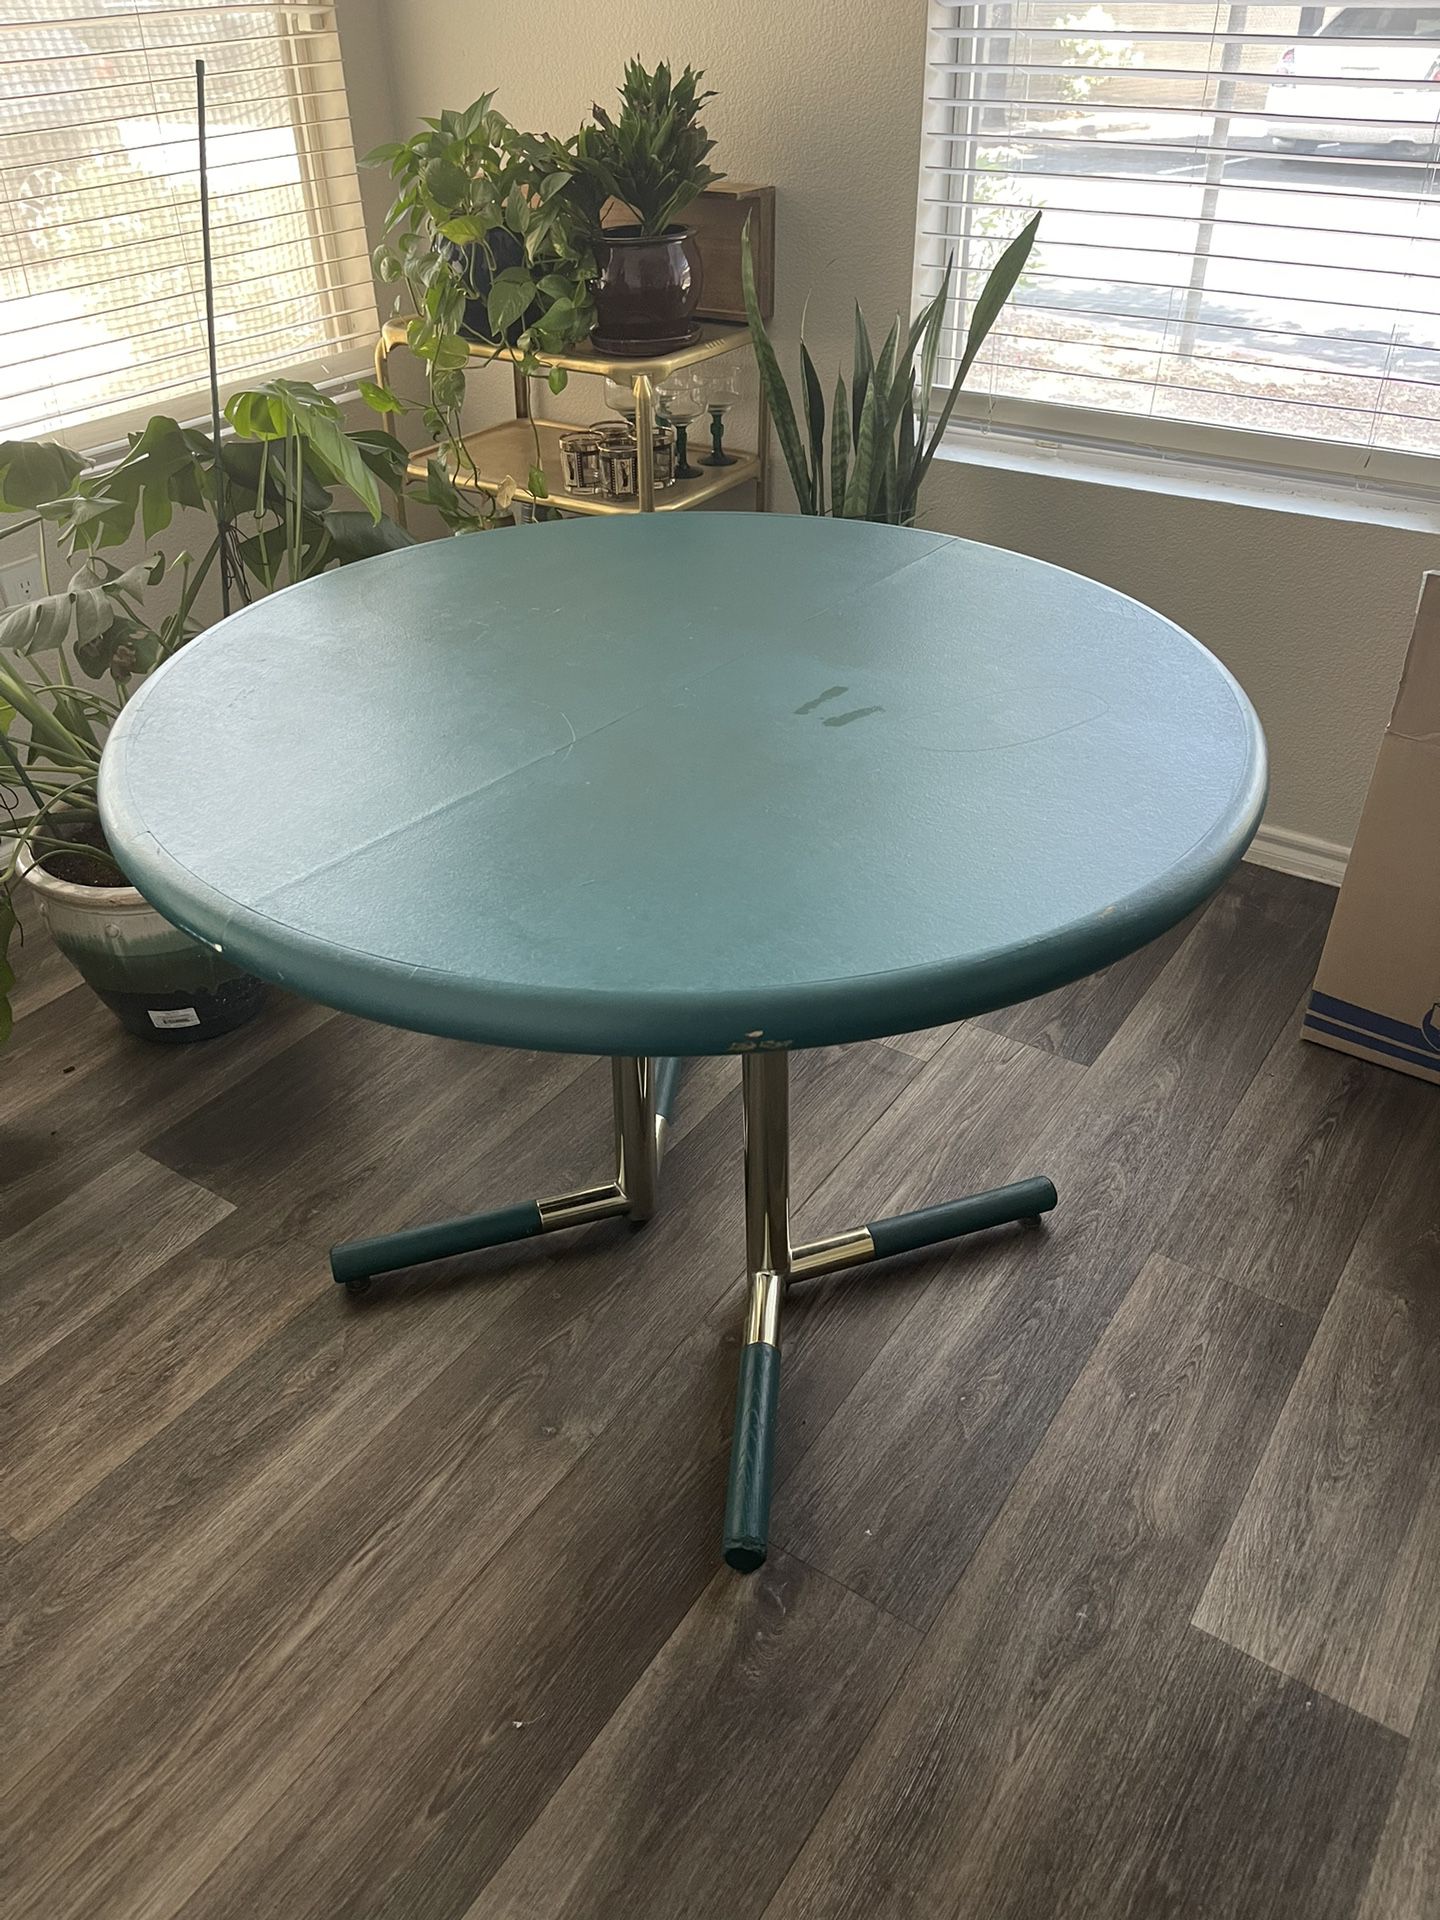 Dining Room Table For Sale!!! 